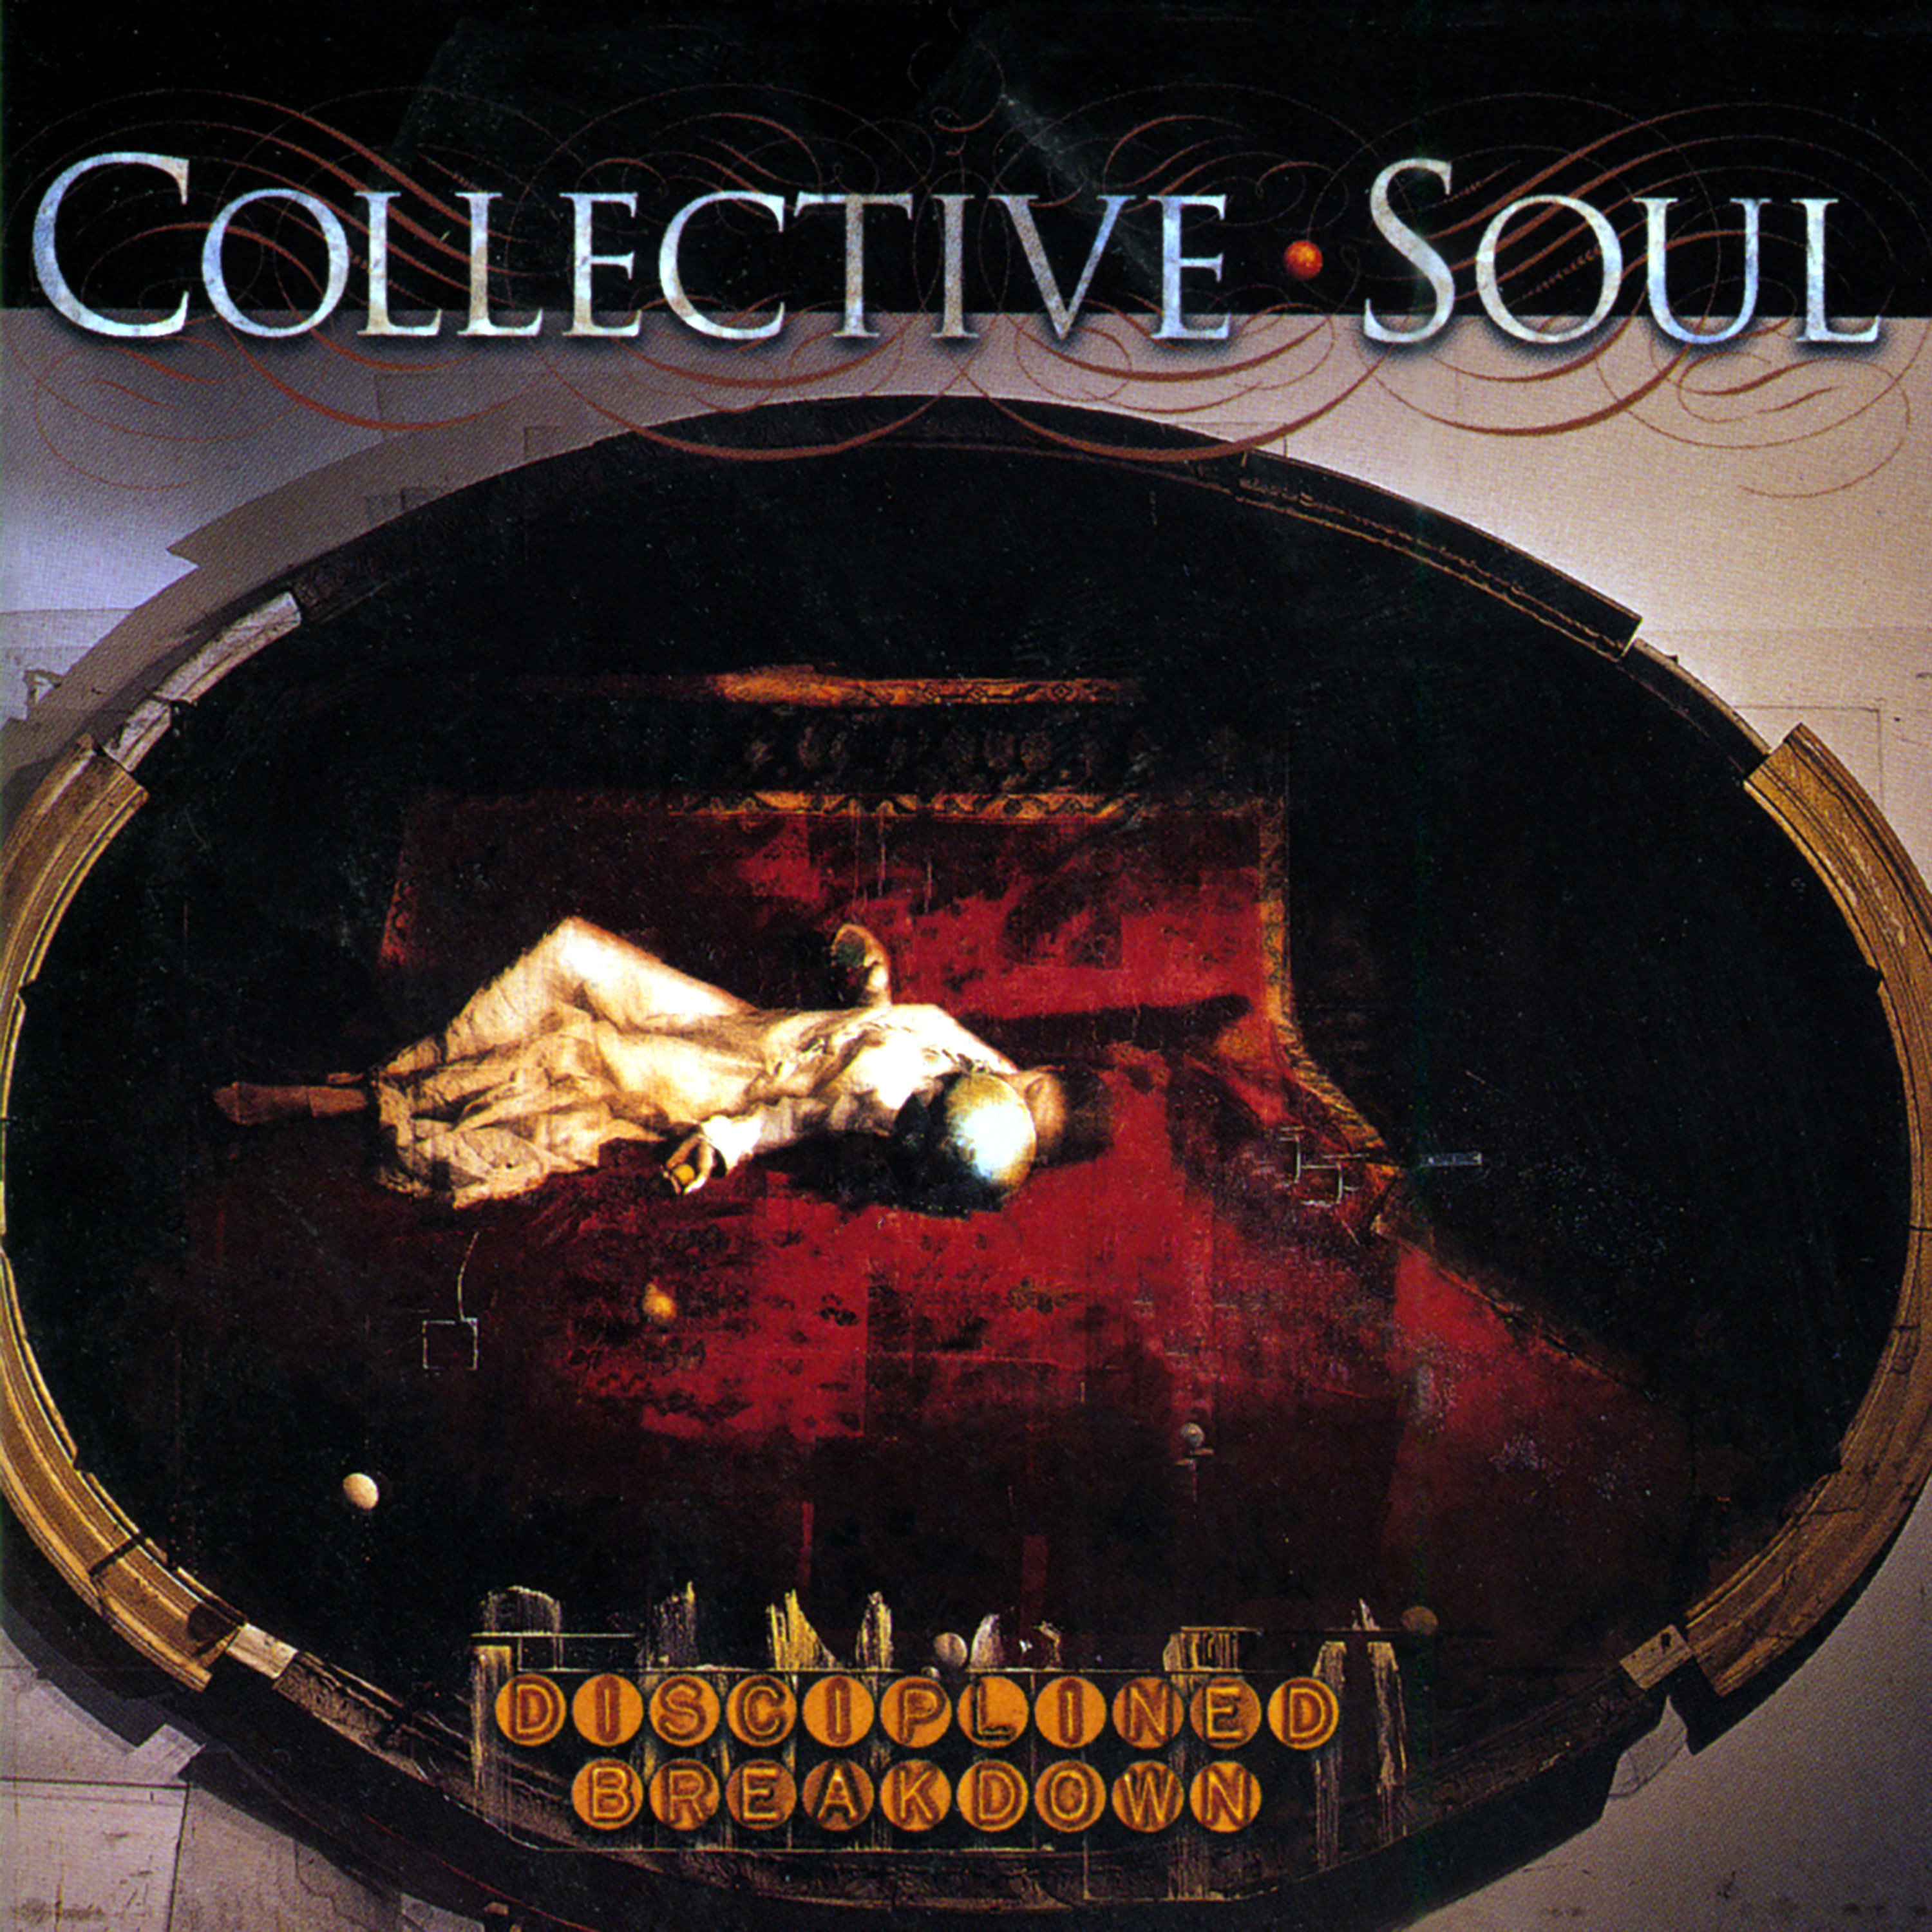 collective soul disciplined breakdown rar - download free apps